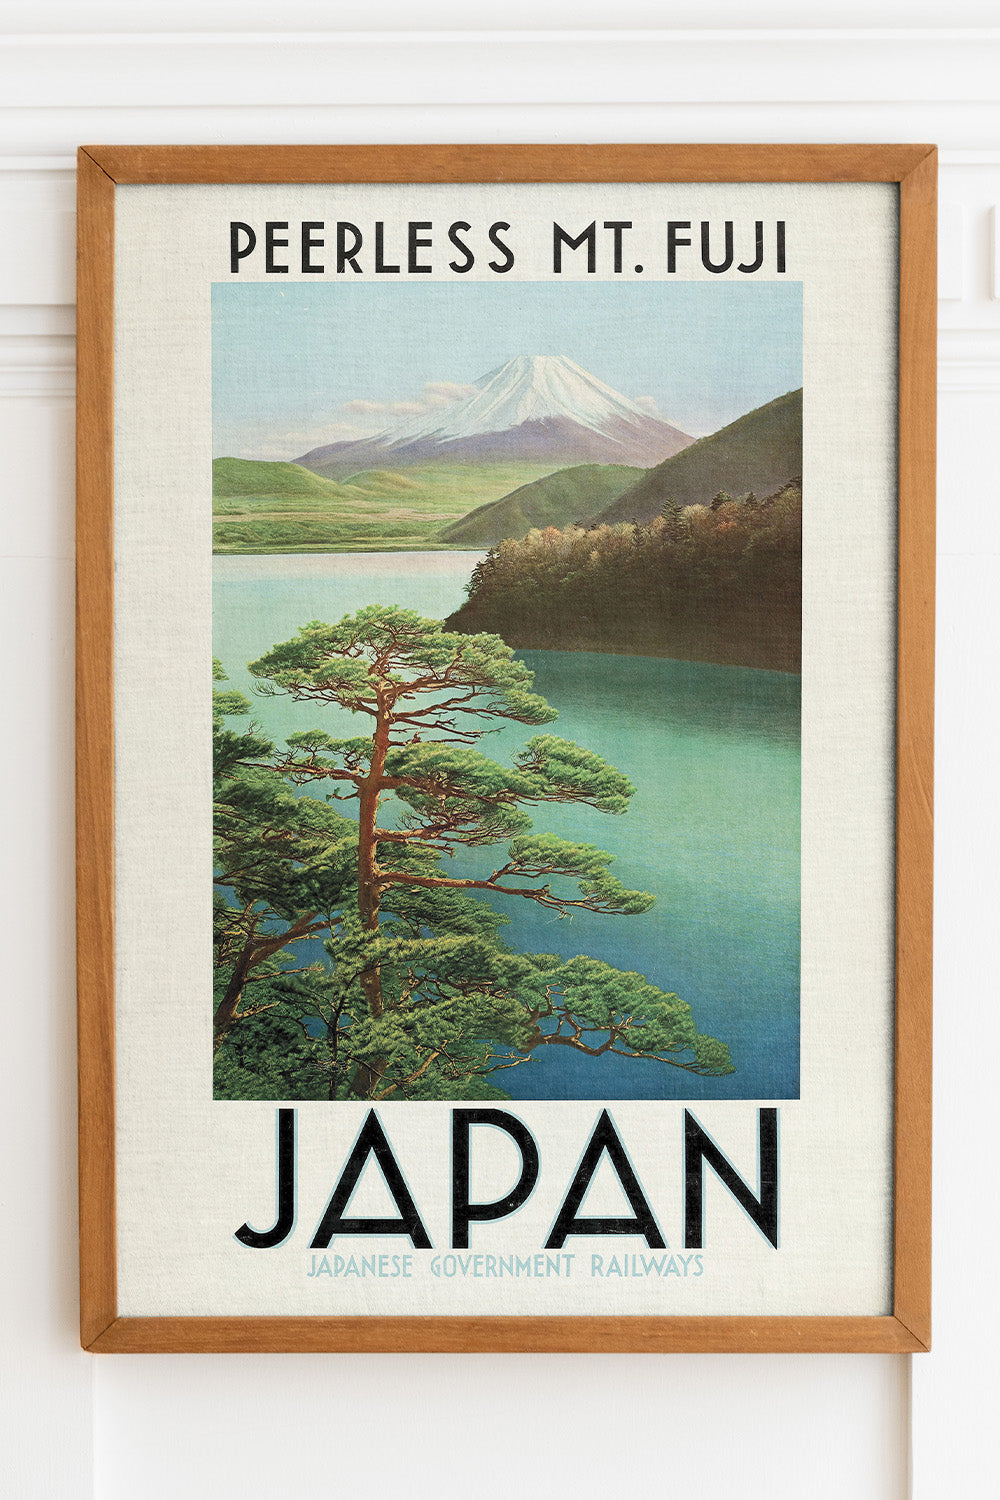 24x36 vintage Japan travel advertisement art print, featuring the majestic Mount Fuji and serene water scene.